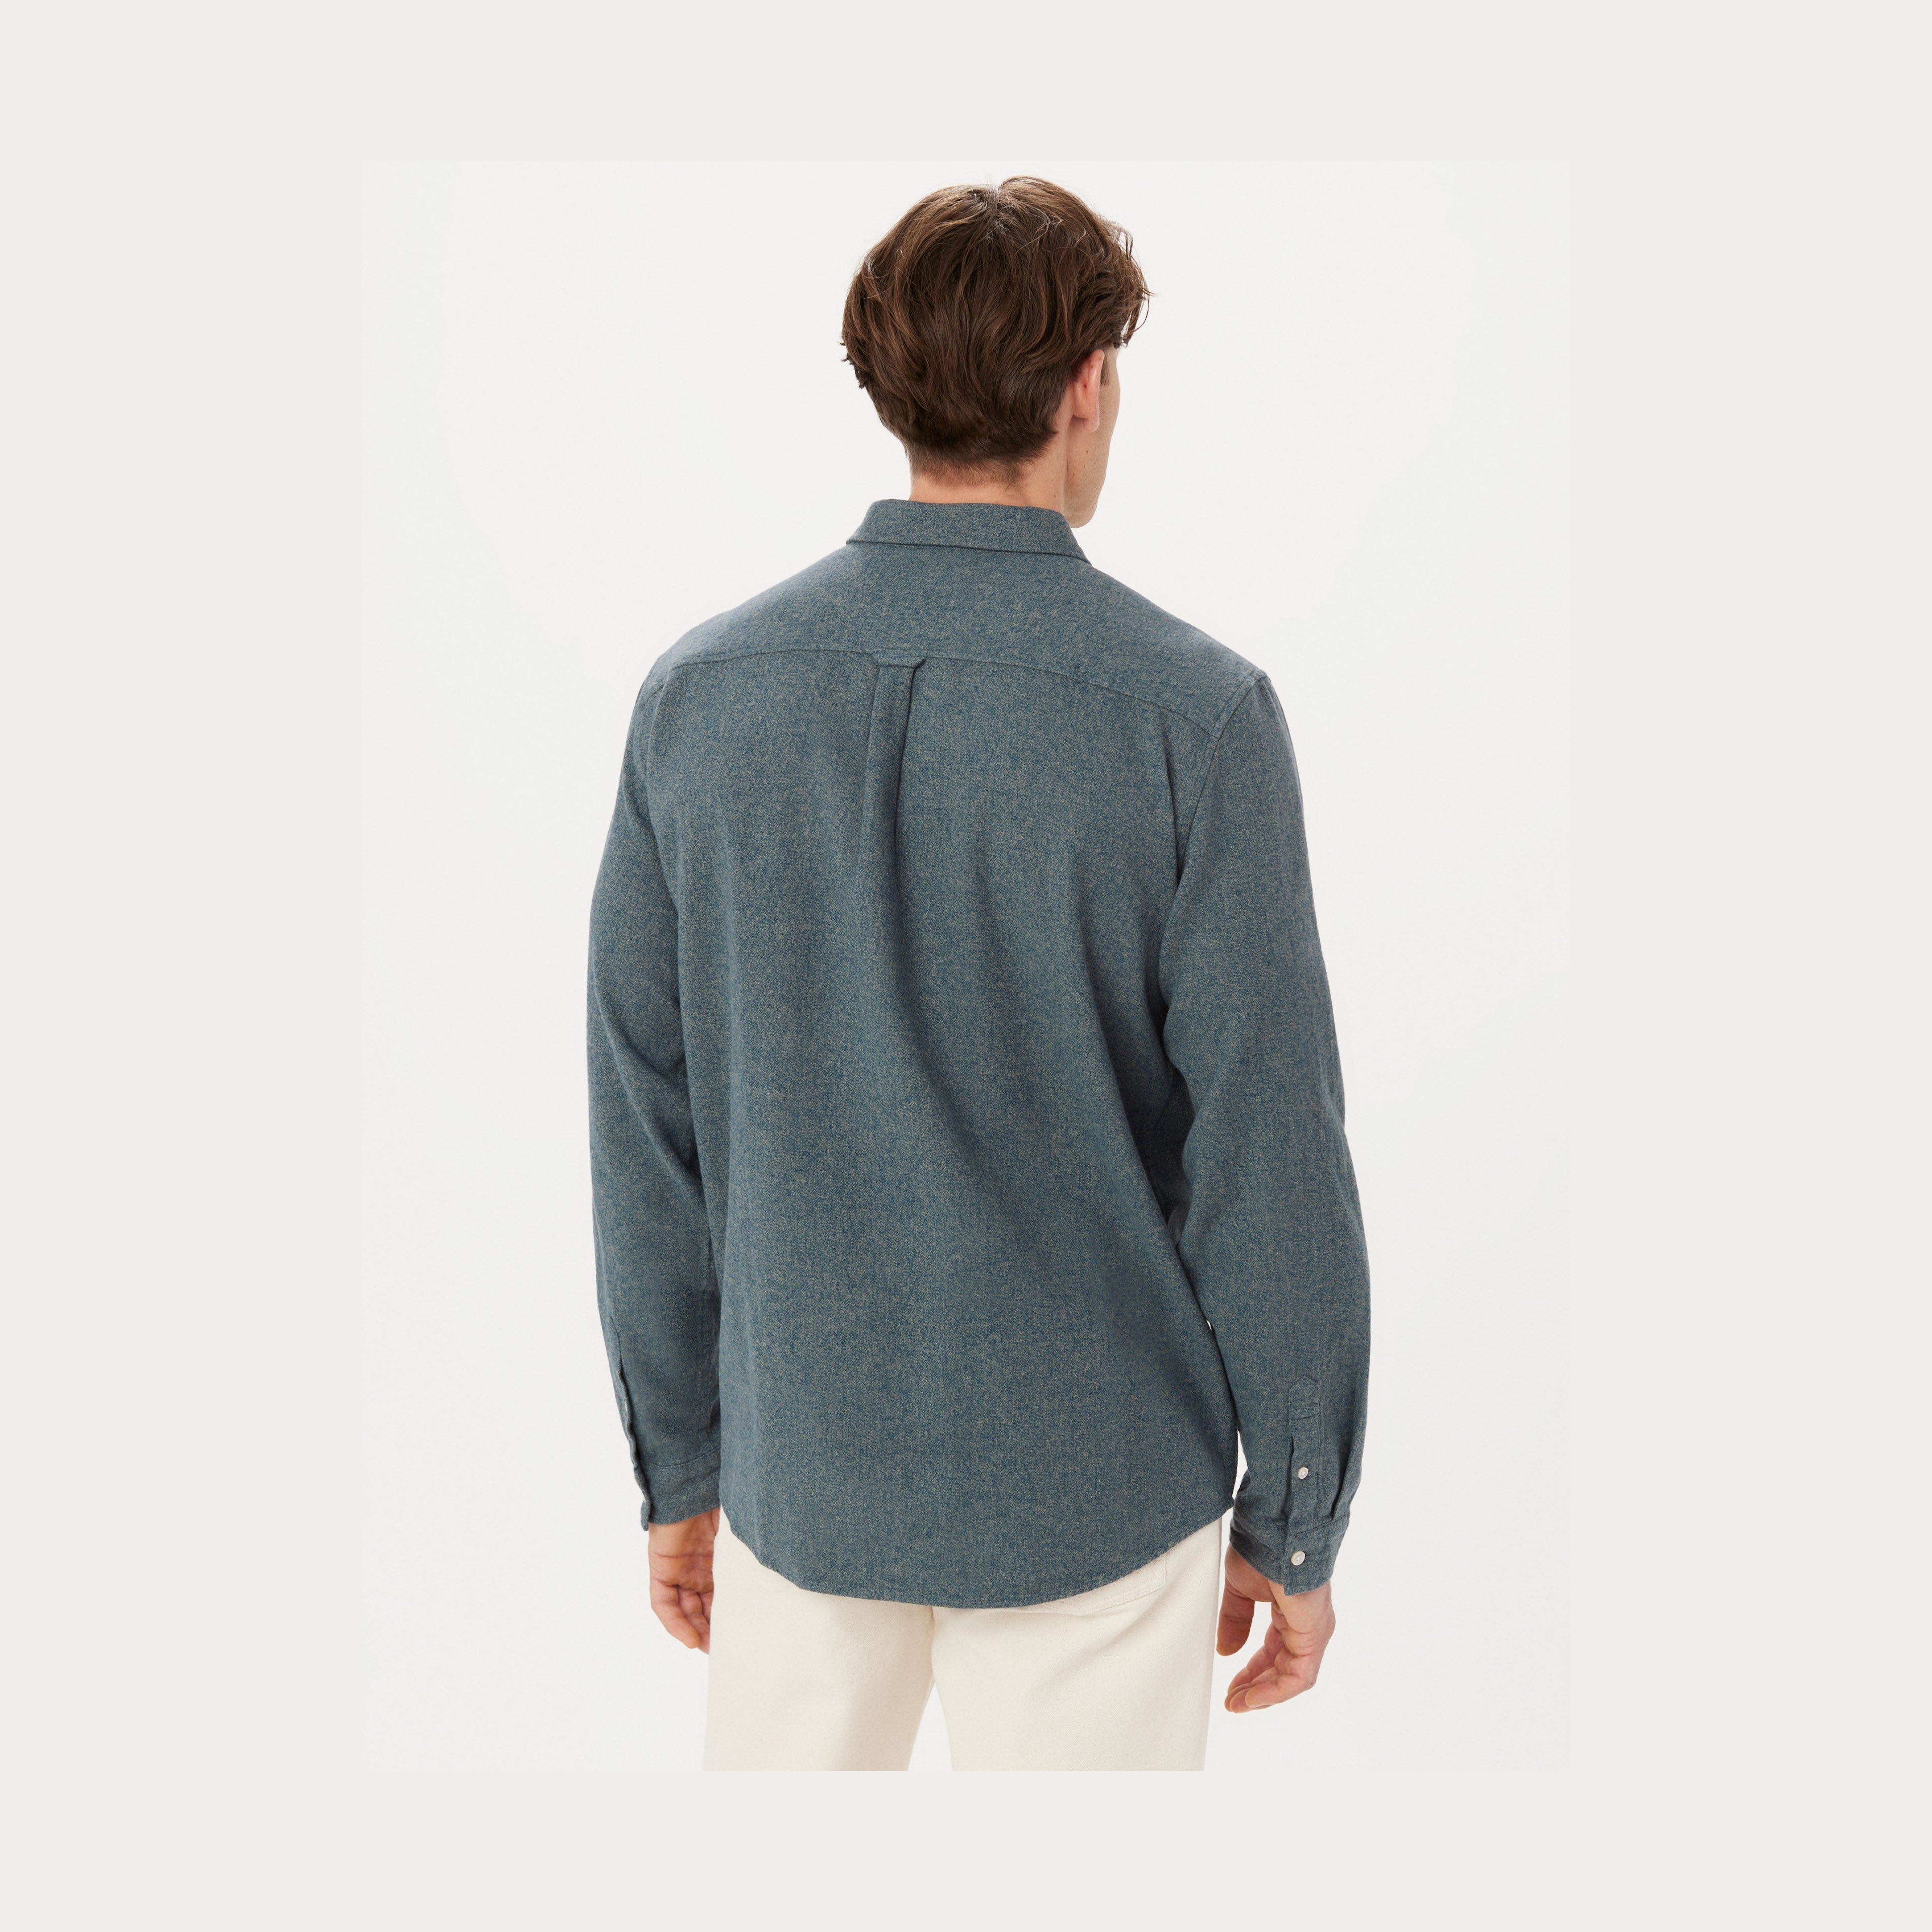 The Heathered Flannel Shirt in Agave